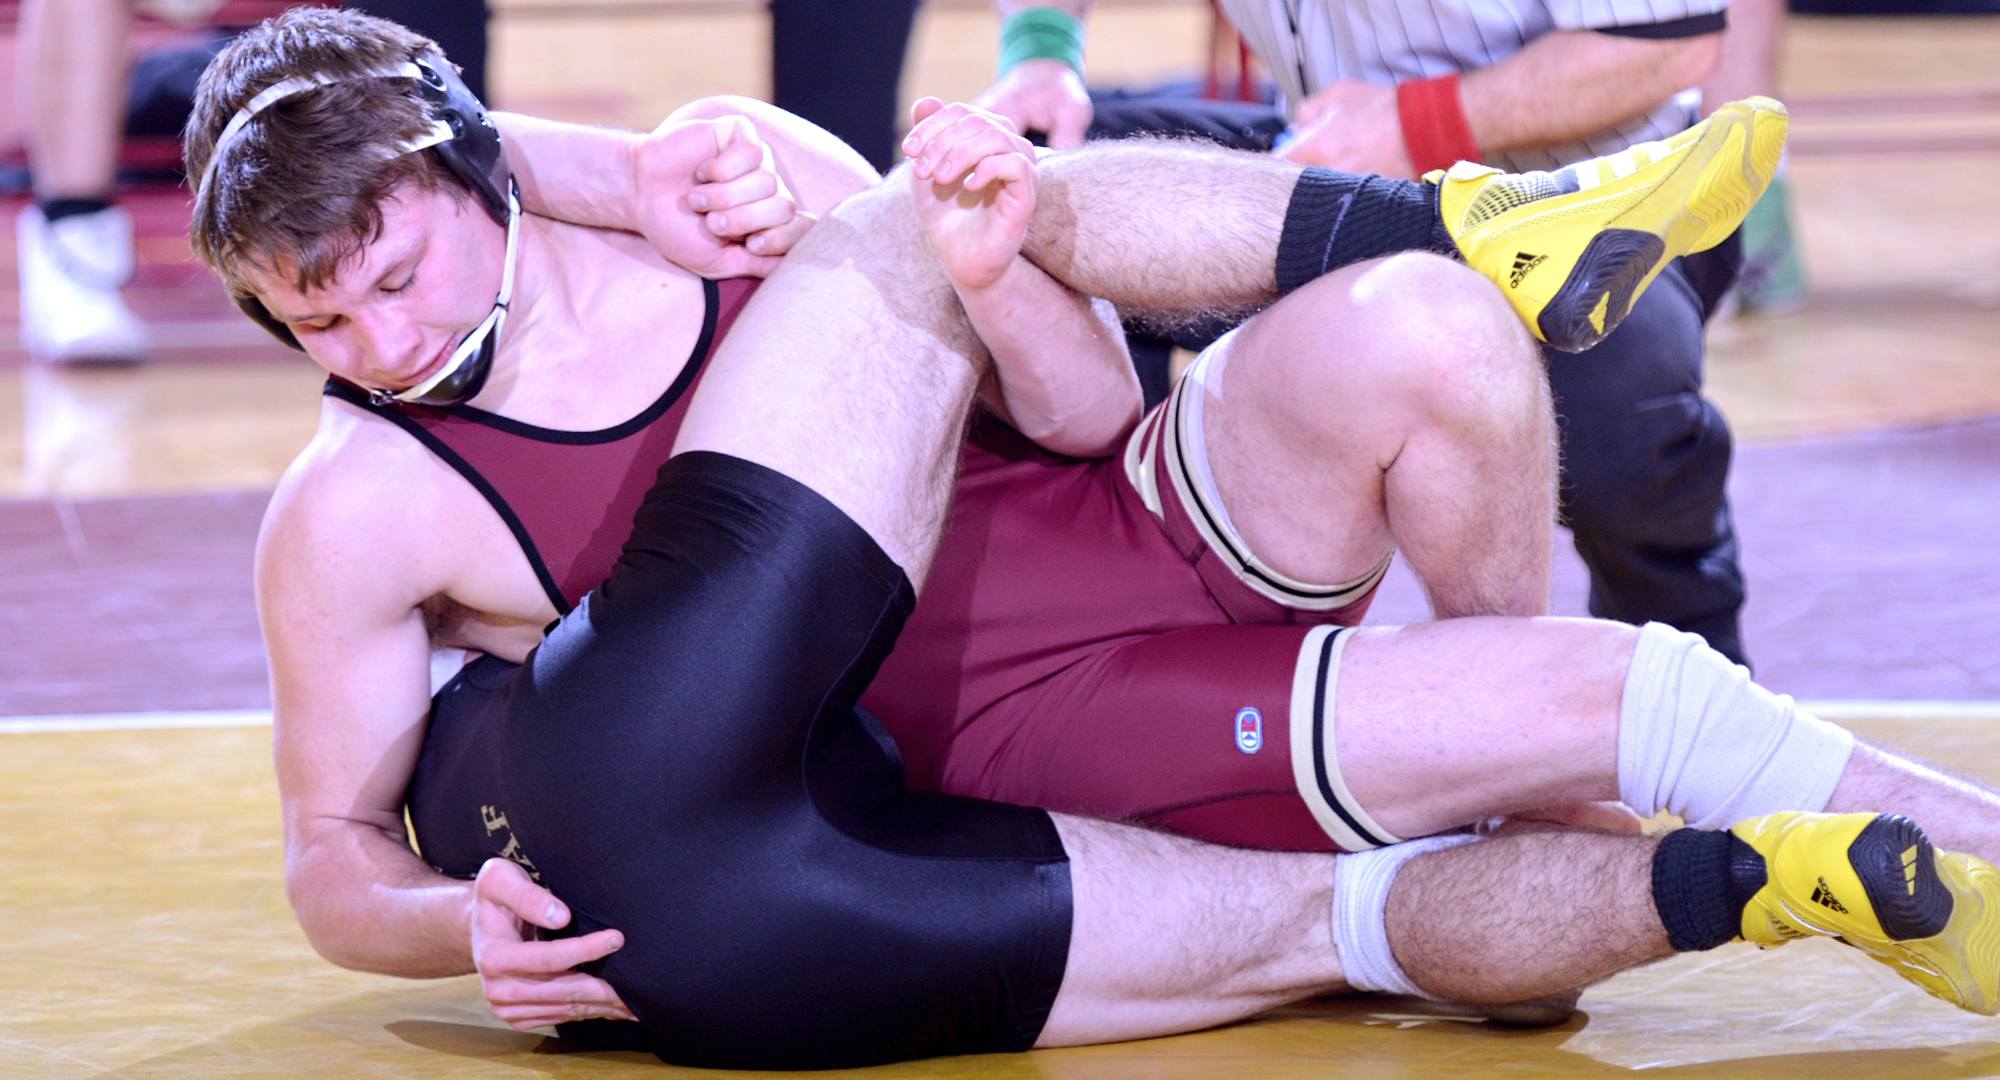 Junior Jake Johnson earned the only pin fall for the Cobbers in their 43-12 win at St. Olaf.